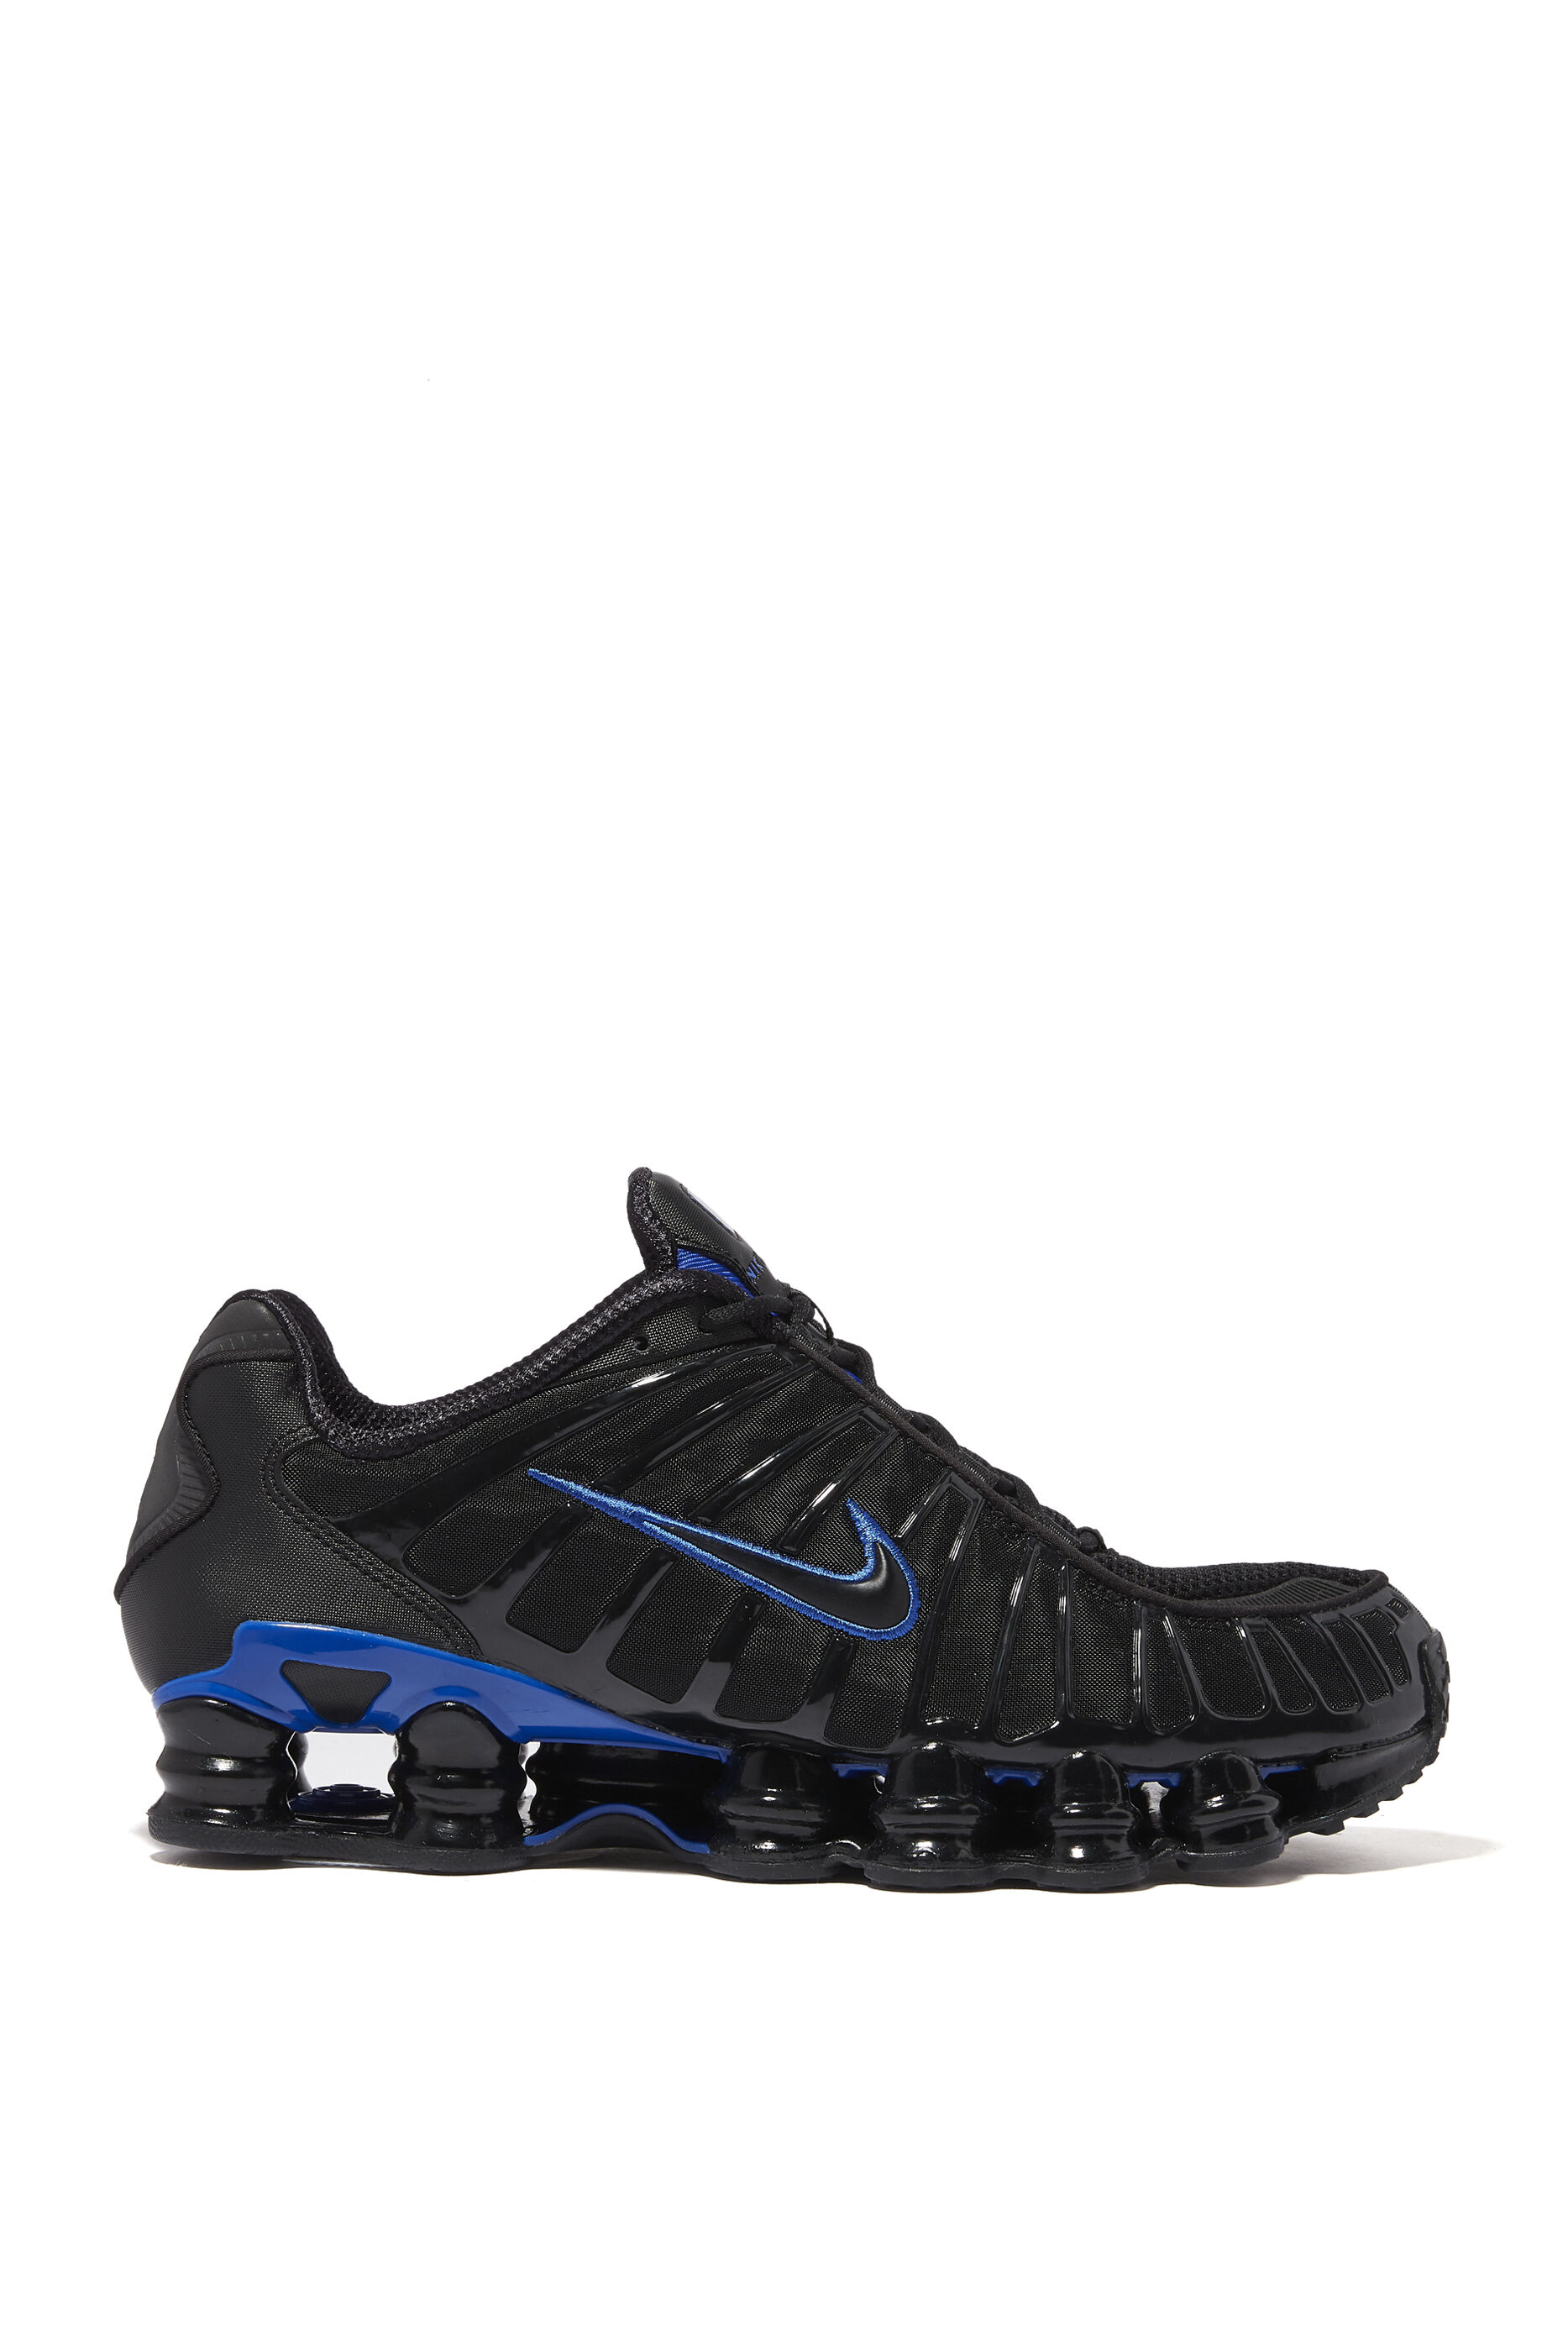 do nike shox tl fit true to size